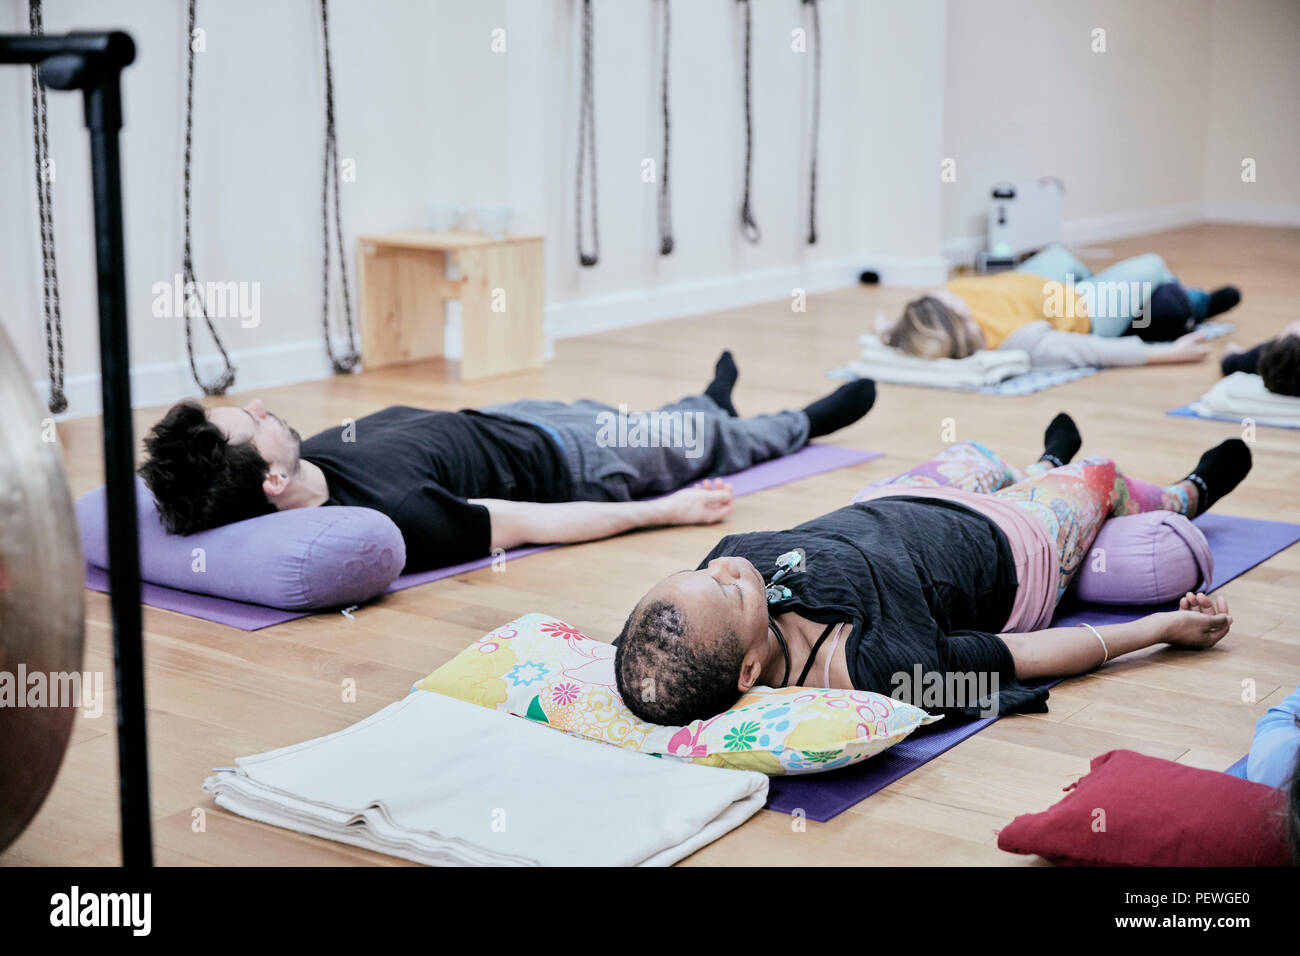 People lying down on an exercise studio floor relaxing after a sound therapy session Stock Photo